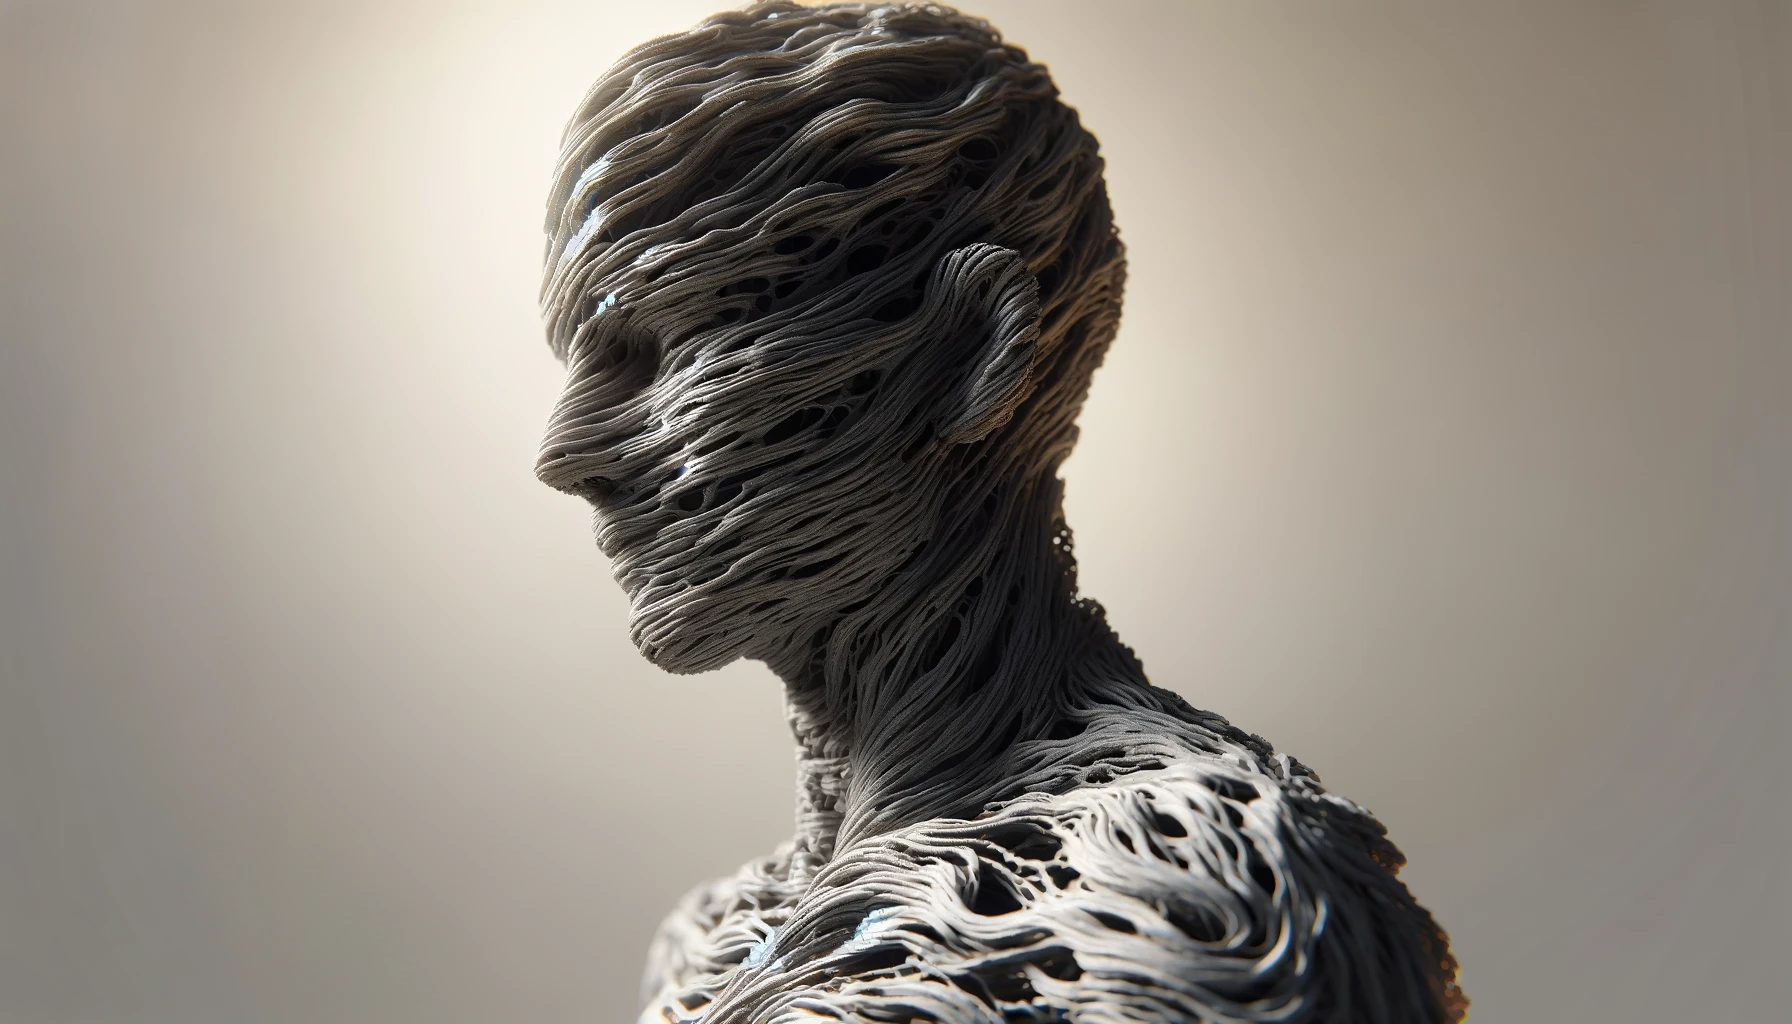 A 16:9 image of an autonomous agent depicted as a sculpture in the style of Magdalena Abakanowicz. The sculpture has a humanoid shape with an abstract, textured surface, resembling the rough, organic forms characteristic of Abakanowicz's work. The figure stands in a contemplative pose, with a complex, woven appearance made of materials that suggest a blend of metal and natural fibers. The background is simple and neutral to highlight the sculpture, with subtle lighting that casts gentle shadows, emphasizing the textures and details of the figure. Created with Dalle3